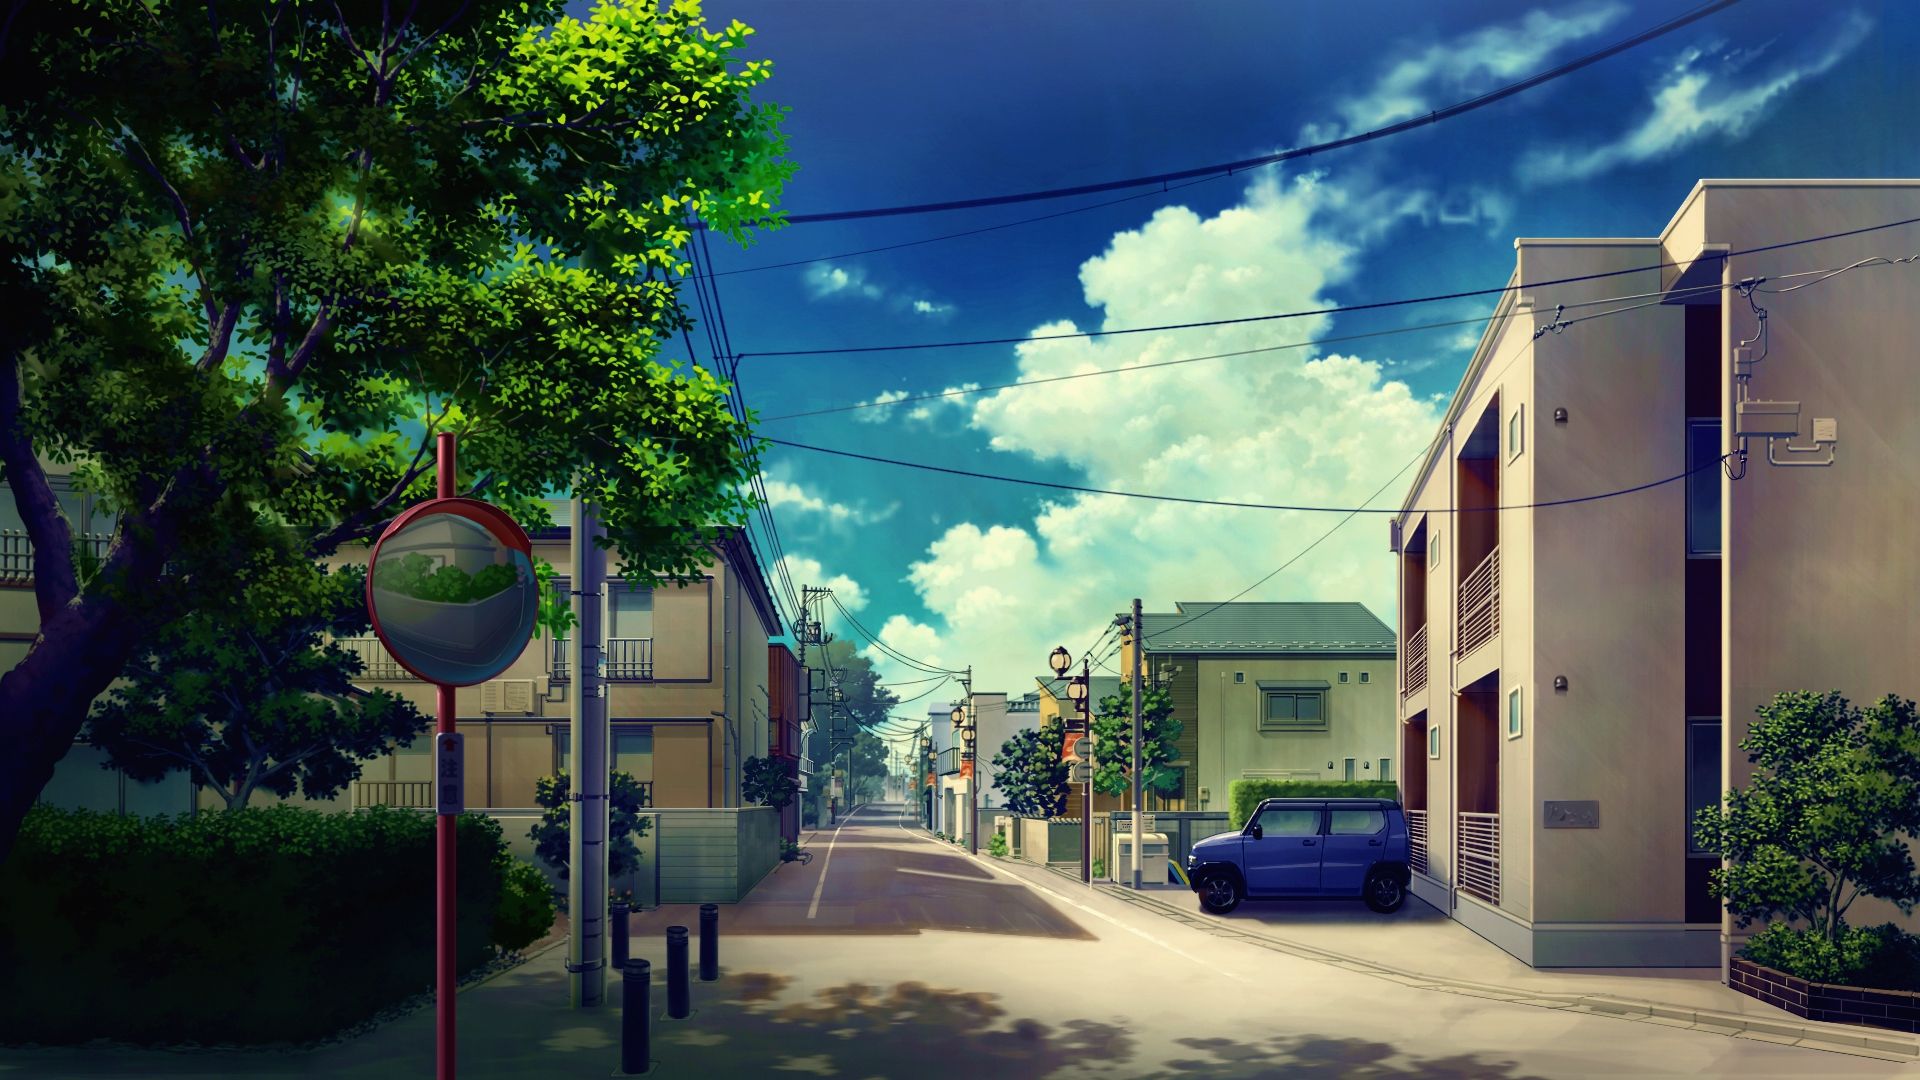 Download 1920x1080 Anime Landscape, Street, Buildings, Trees, Scenic, Mirror Wallpaper for Widescreen